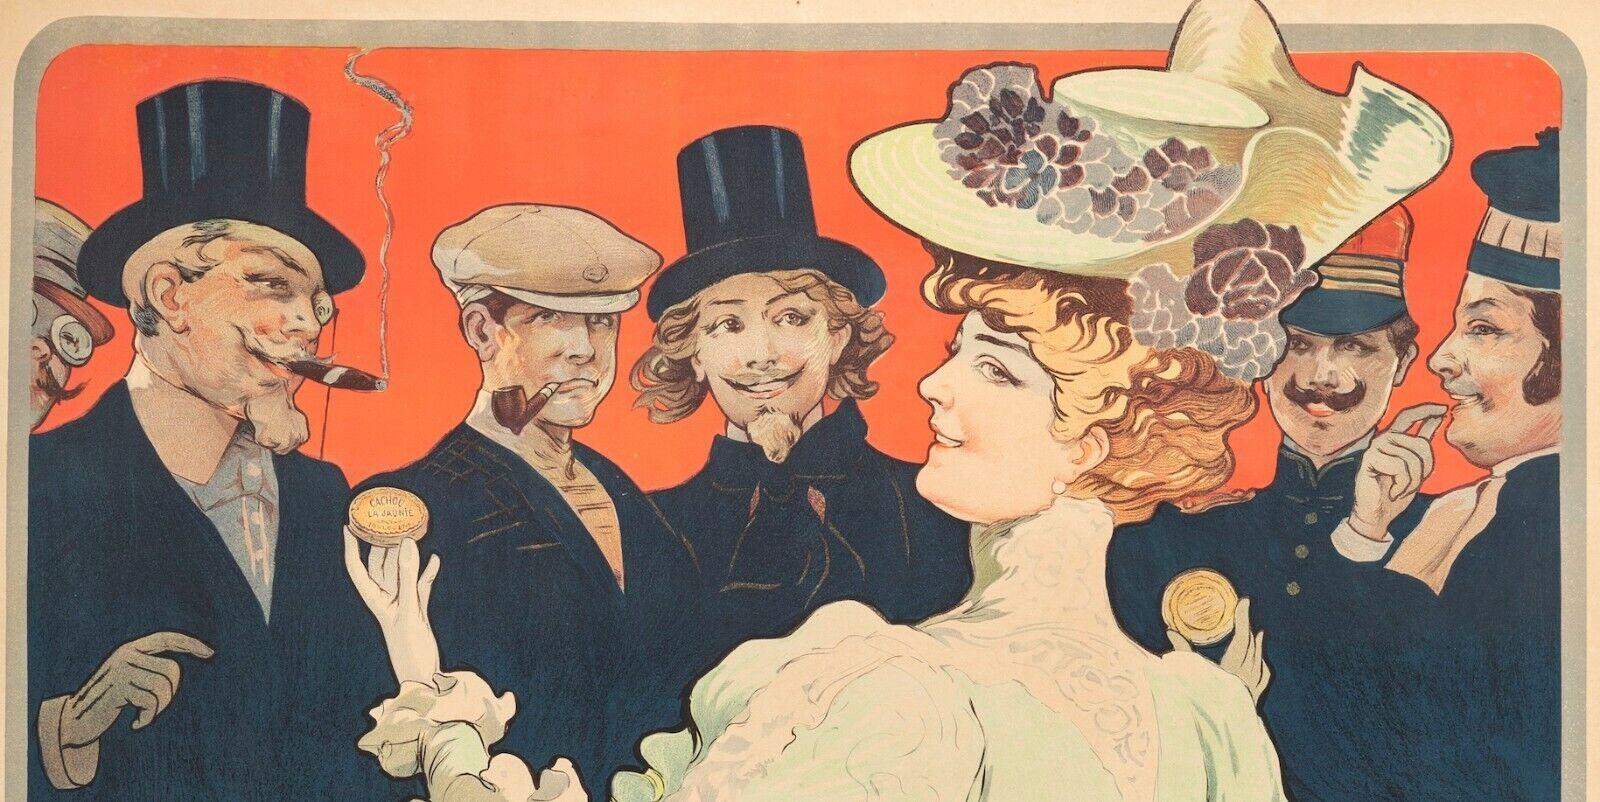 Original Vintage Poster-F. Tamagno-Cachou Lajaunie-Reglisse, c.1900

On the poster, a young woman, wearing a yellow hat decorated with flowers, presents a box of Lajaunie Cachous to six gentlemen. Each of these gentlemen represents a panel of